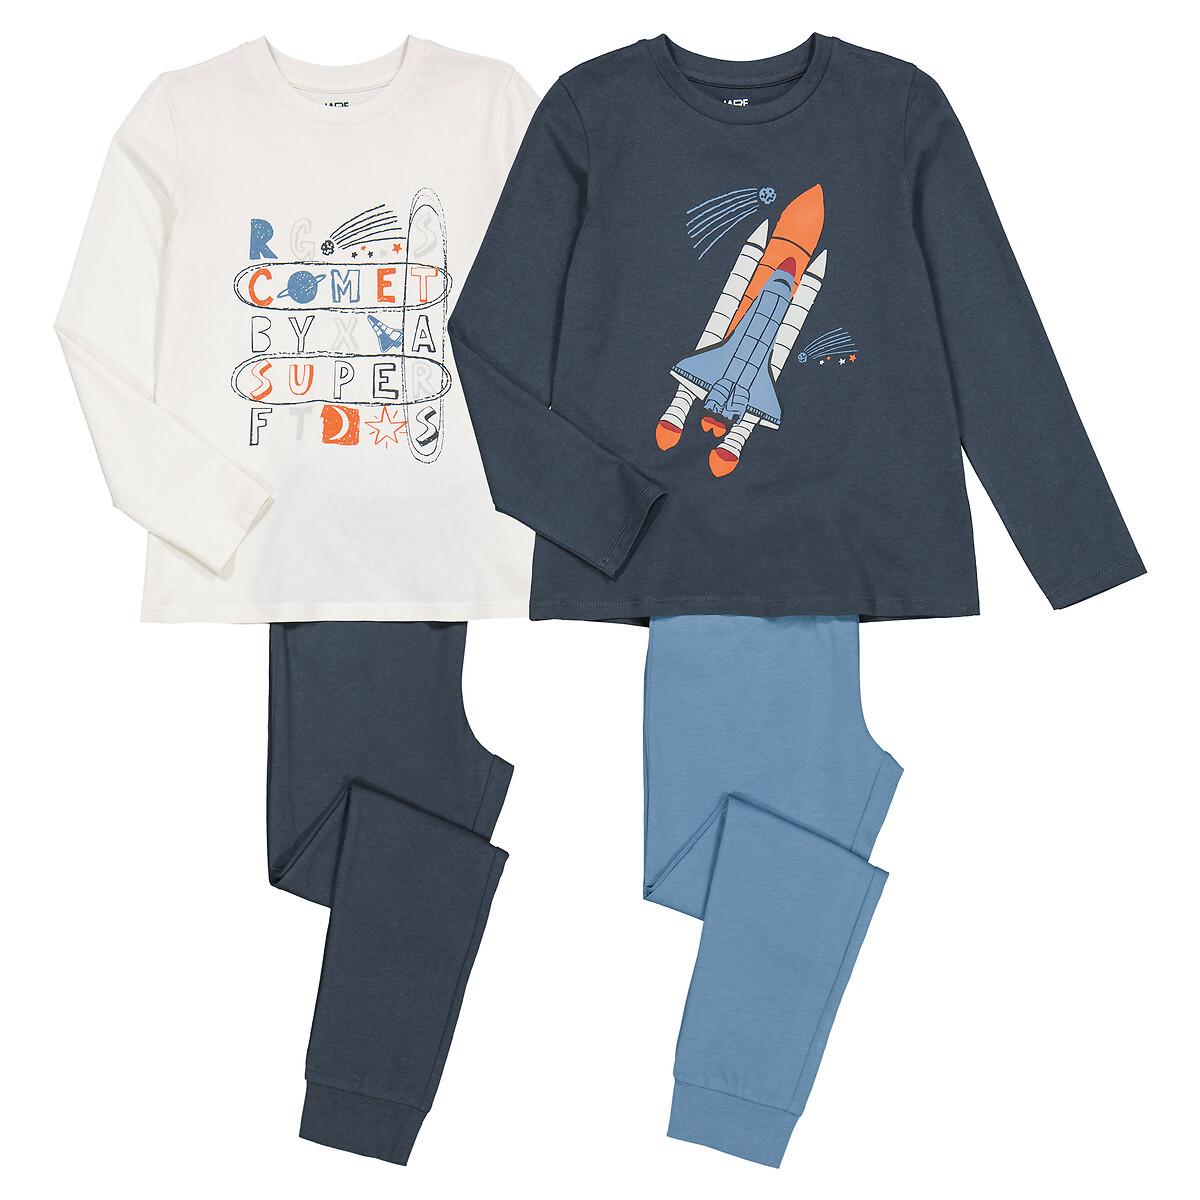 La Redoute Collections  2er-Pack Pyjamas 